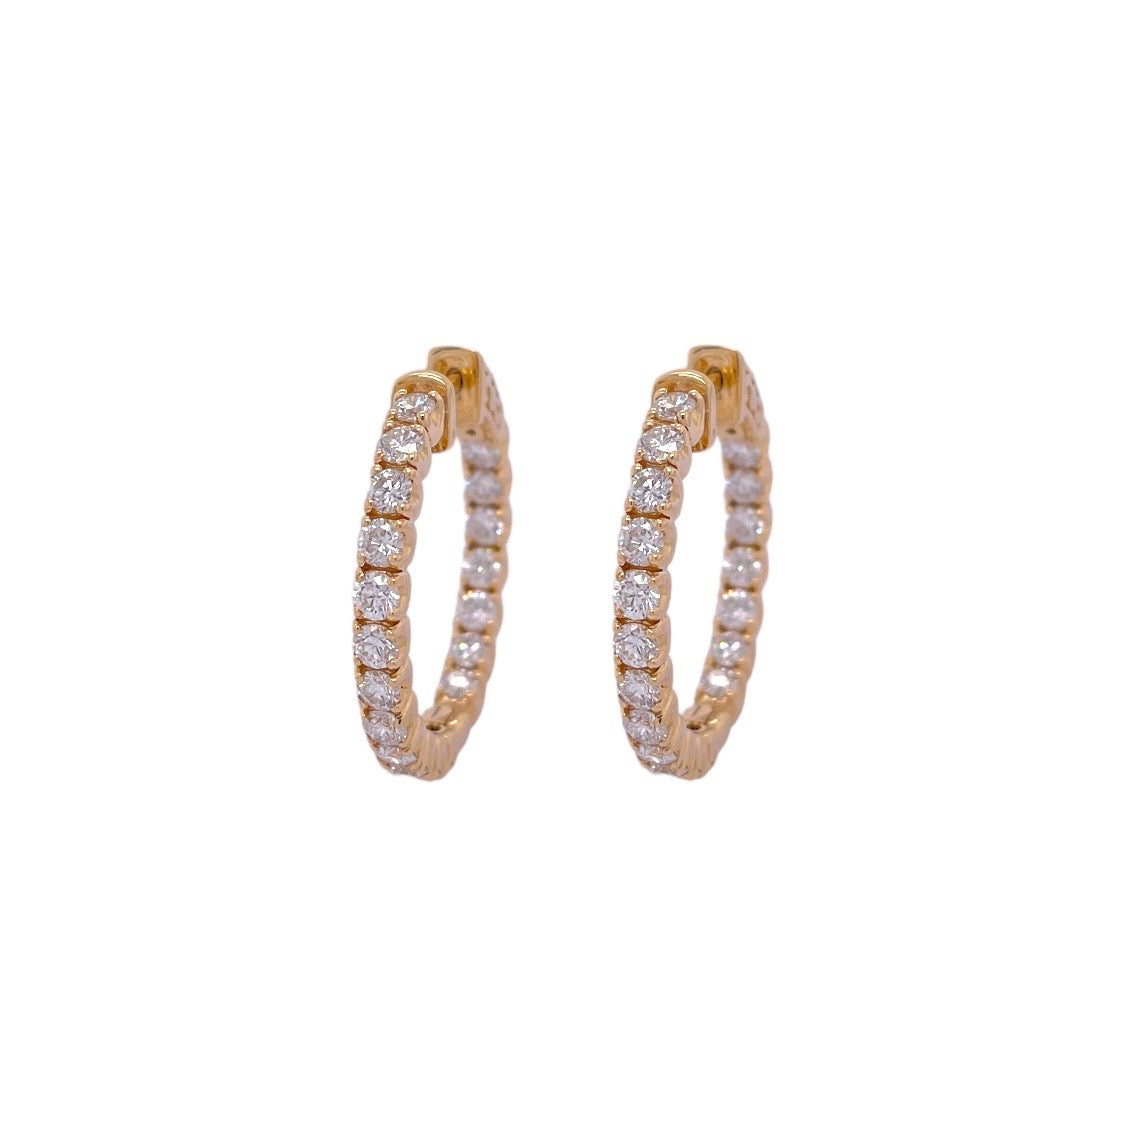 Inside Out Diamond Hoops in 14K Yellow Gold